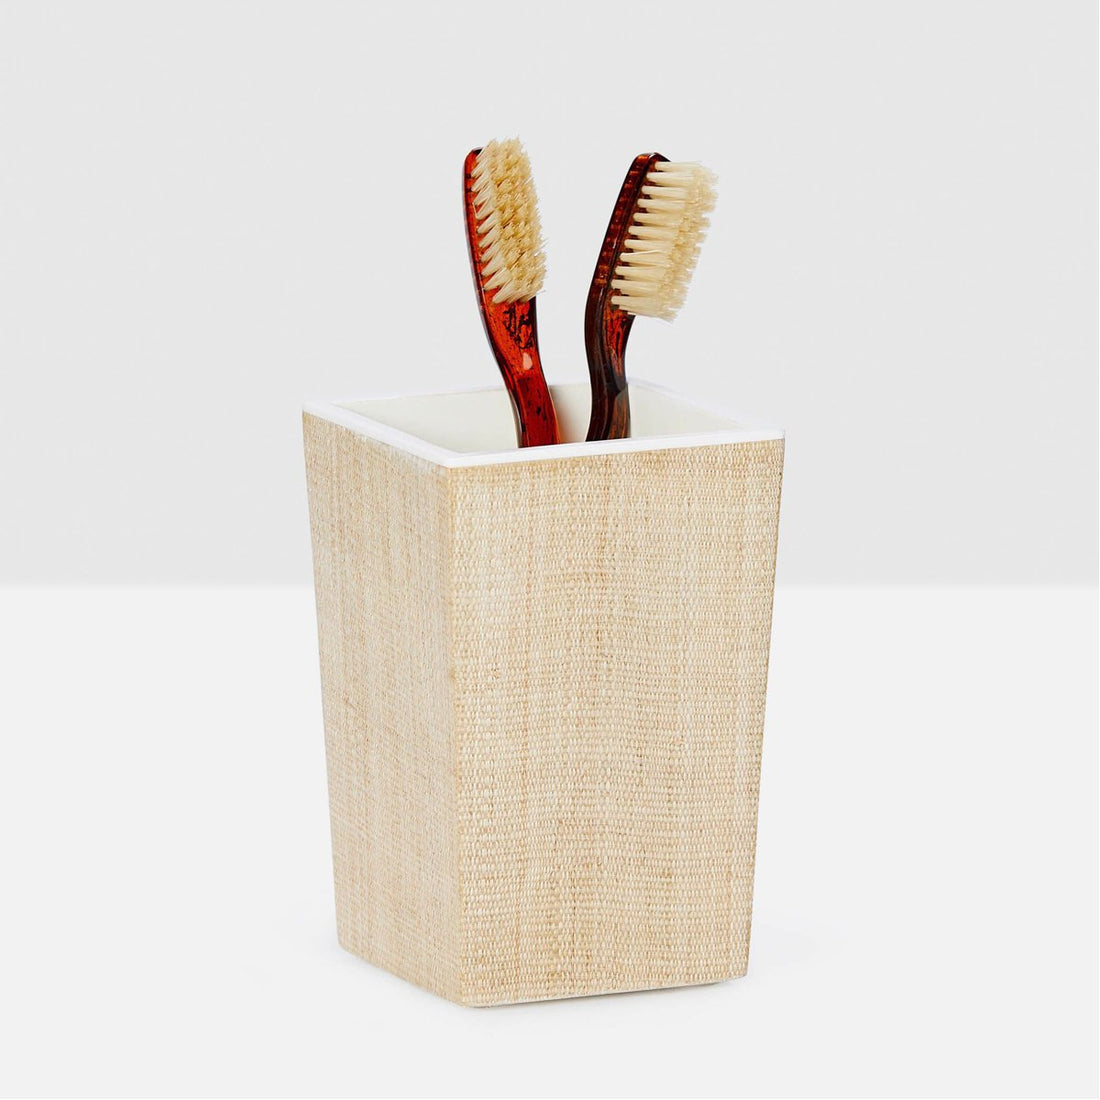 Pigeon and Poodle Maranello Square Brush Holder, Tapered